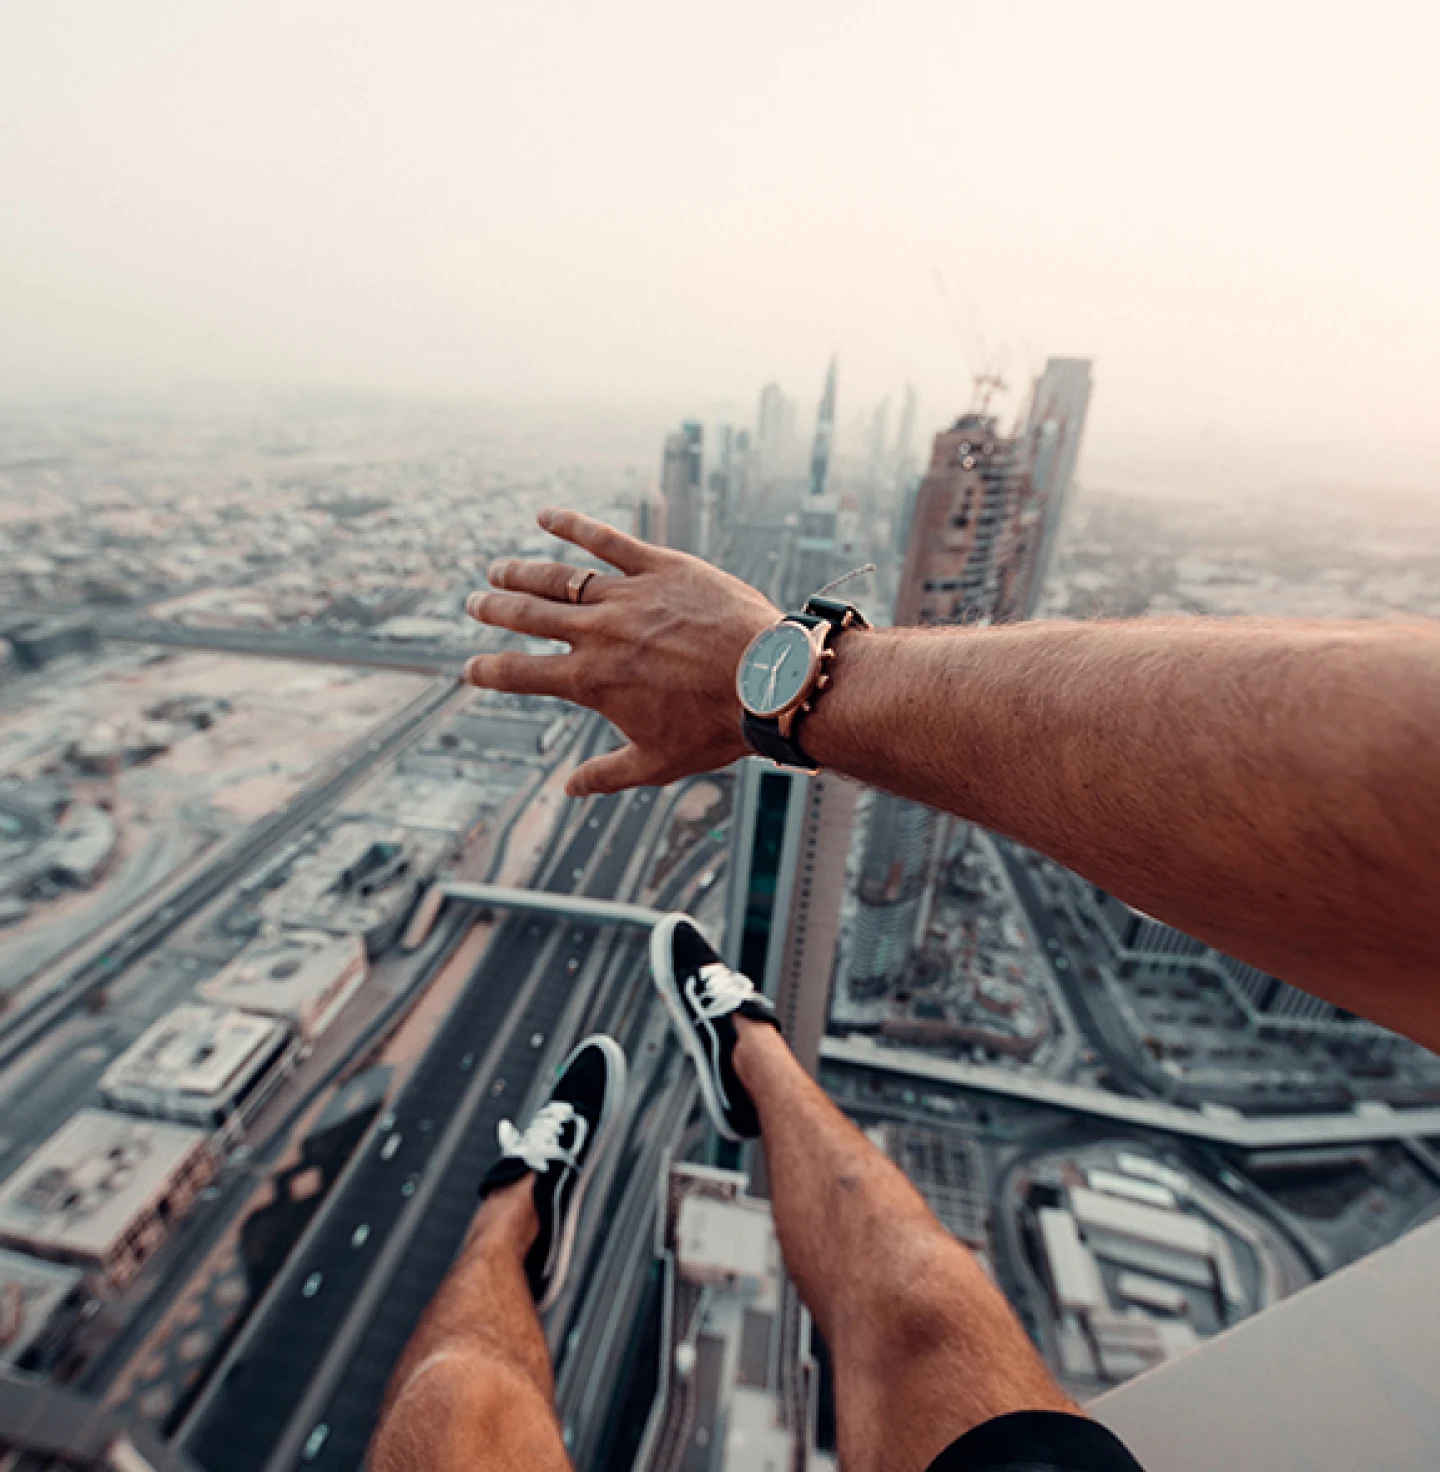 Dangling legs in black sneakers and a wrist-watched arm above a vast cityscape